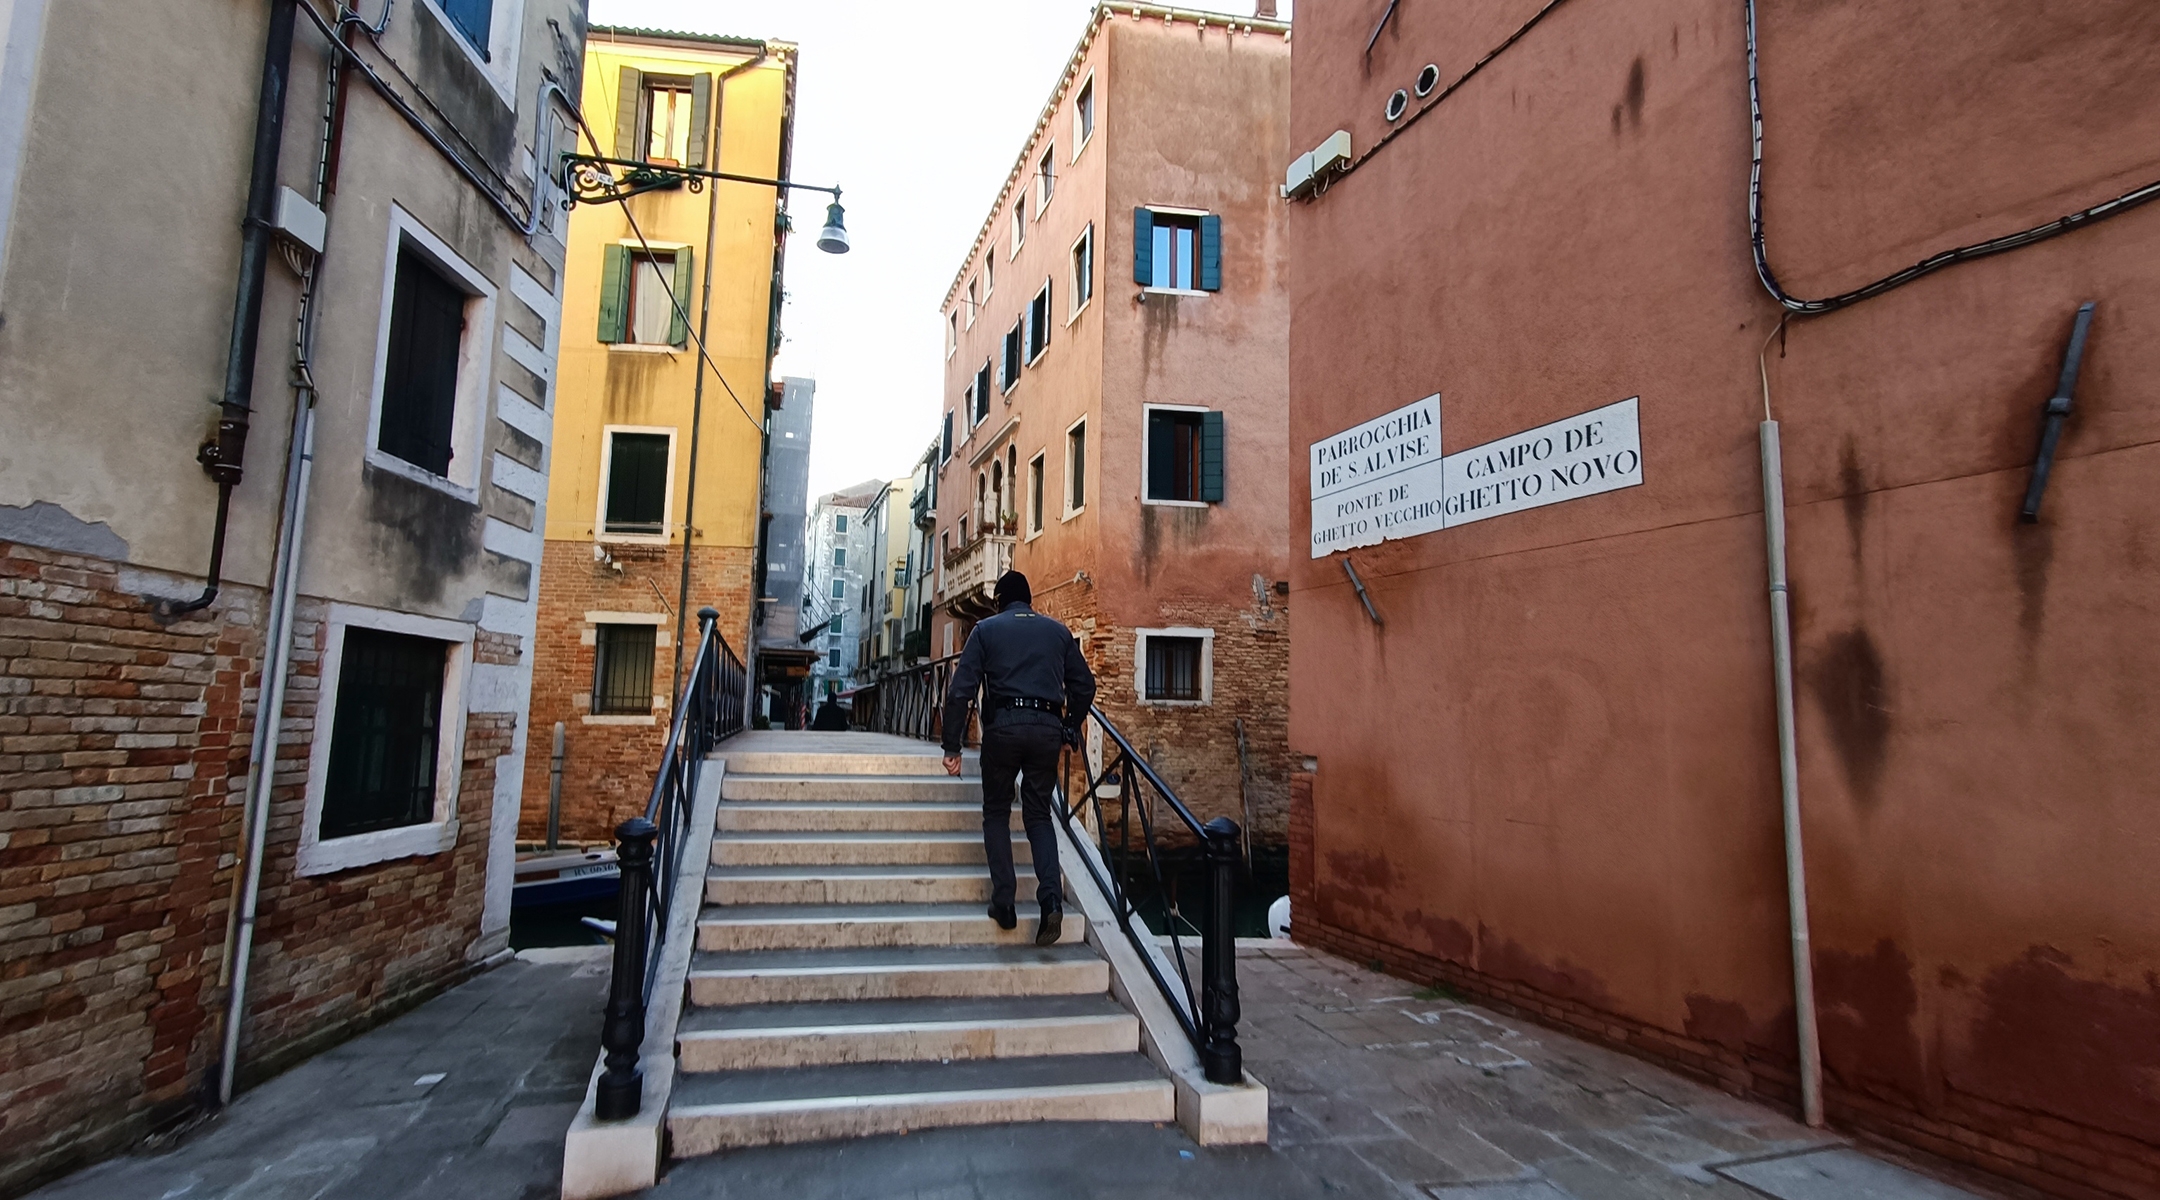 A guard climbs stairs by the entrance to the Campo di Ghetto Nuovo, or former Jewish Ghetto, in Venice. (Orge Castellano)